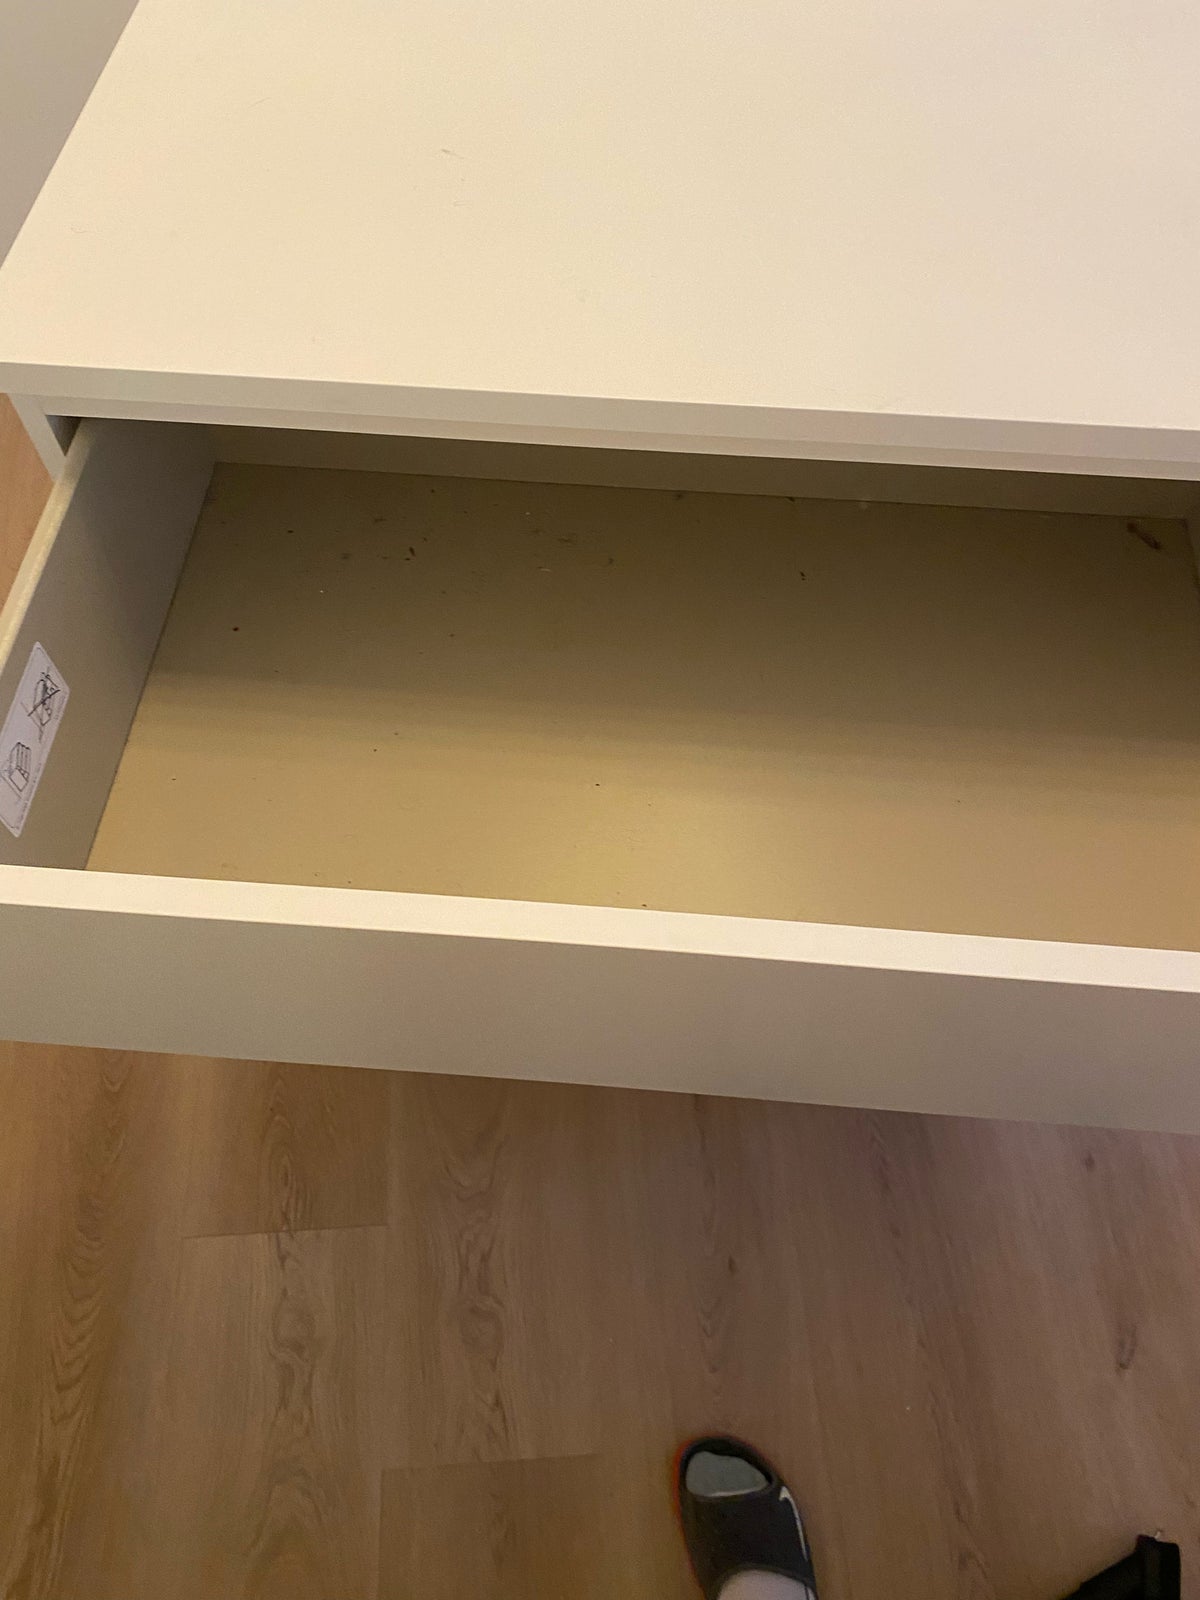 Andet, andet materiale, IKEA